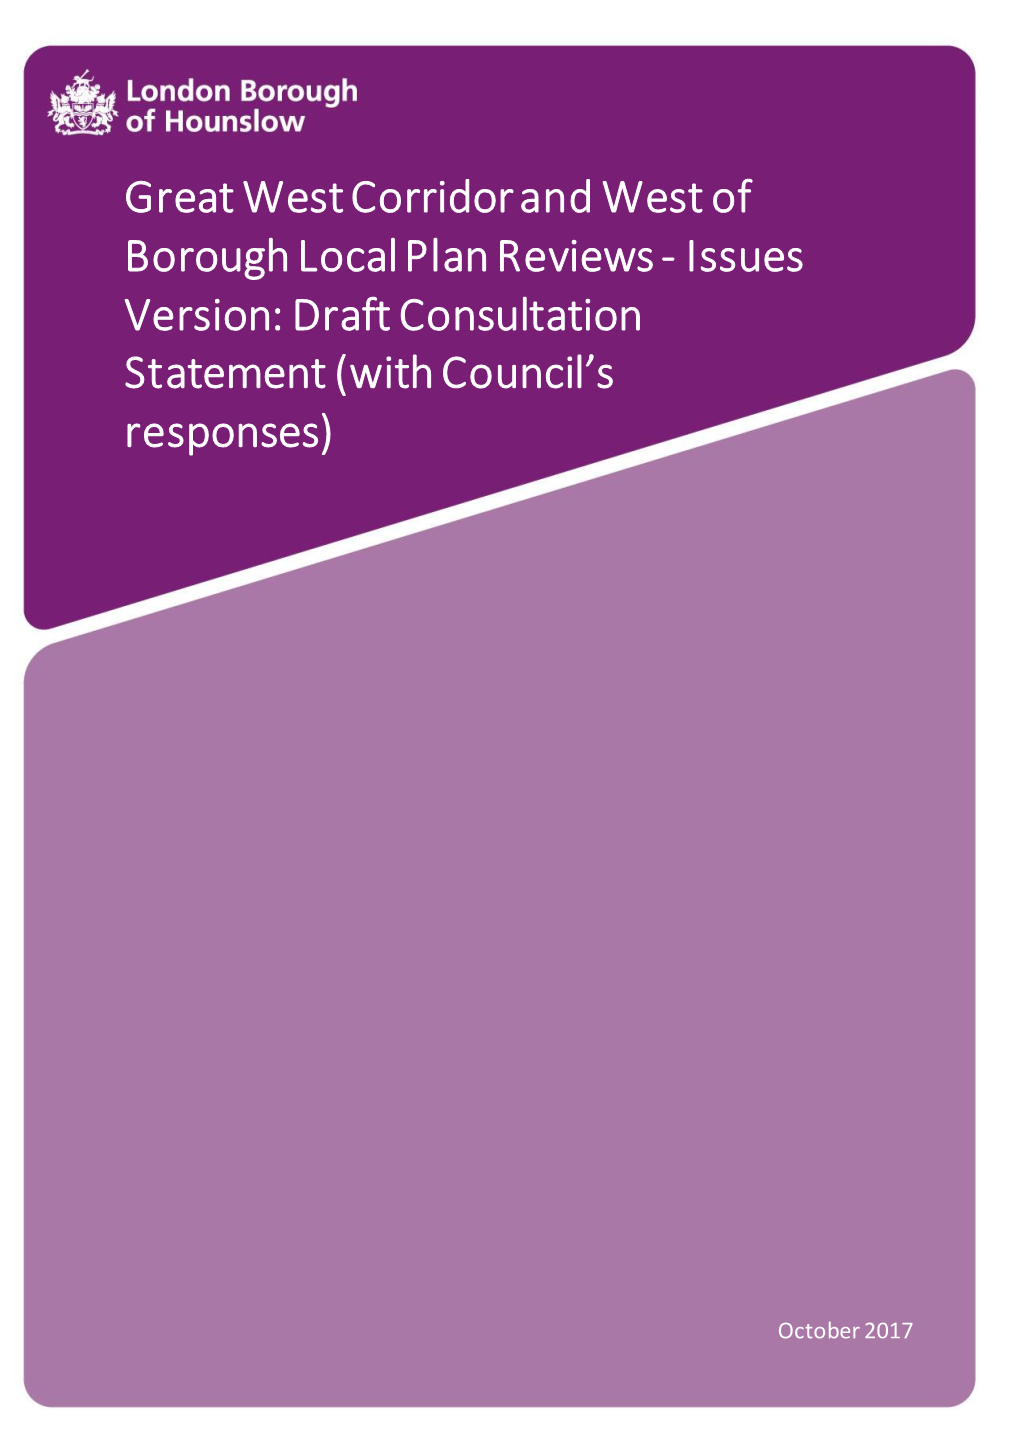 Great West Corridor and West of Borough Local Plan Reviews - Issues Version: Draft Consultation Statement (With Council’S Responses)